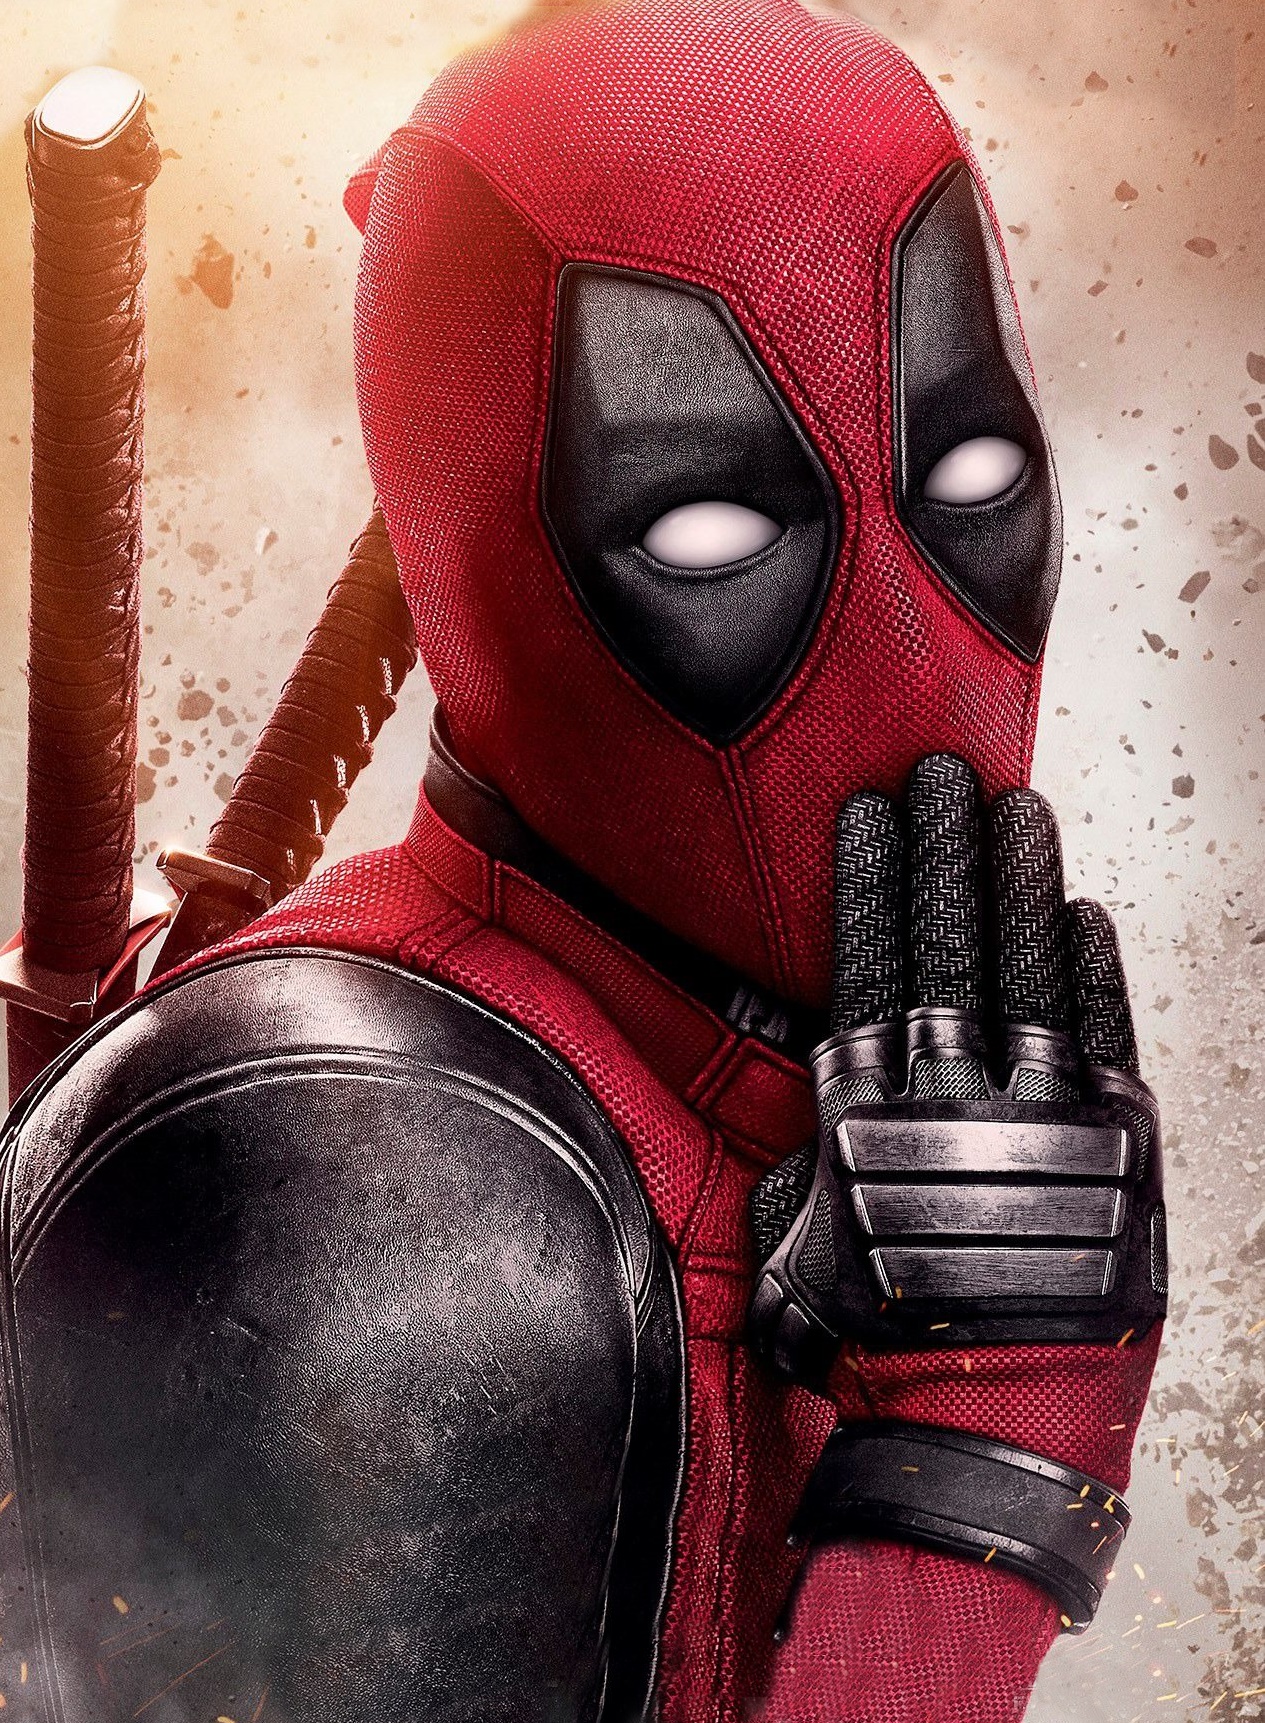 Celebrate Thanksgiving with Deadpool's Hilarious Promo Image